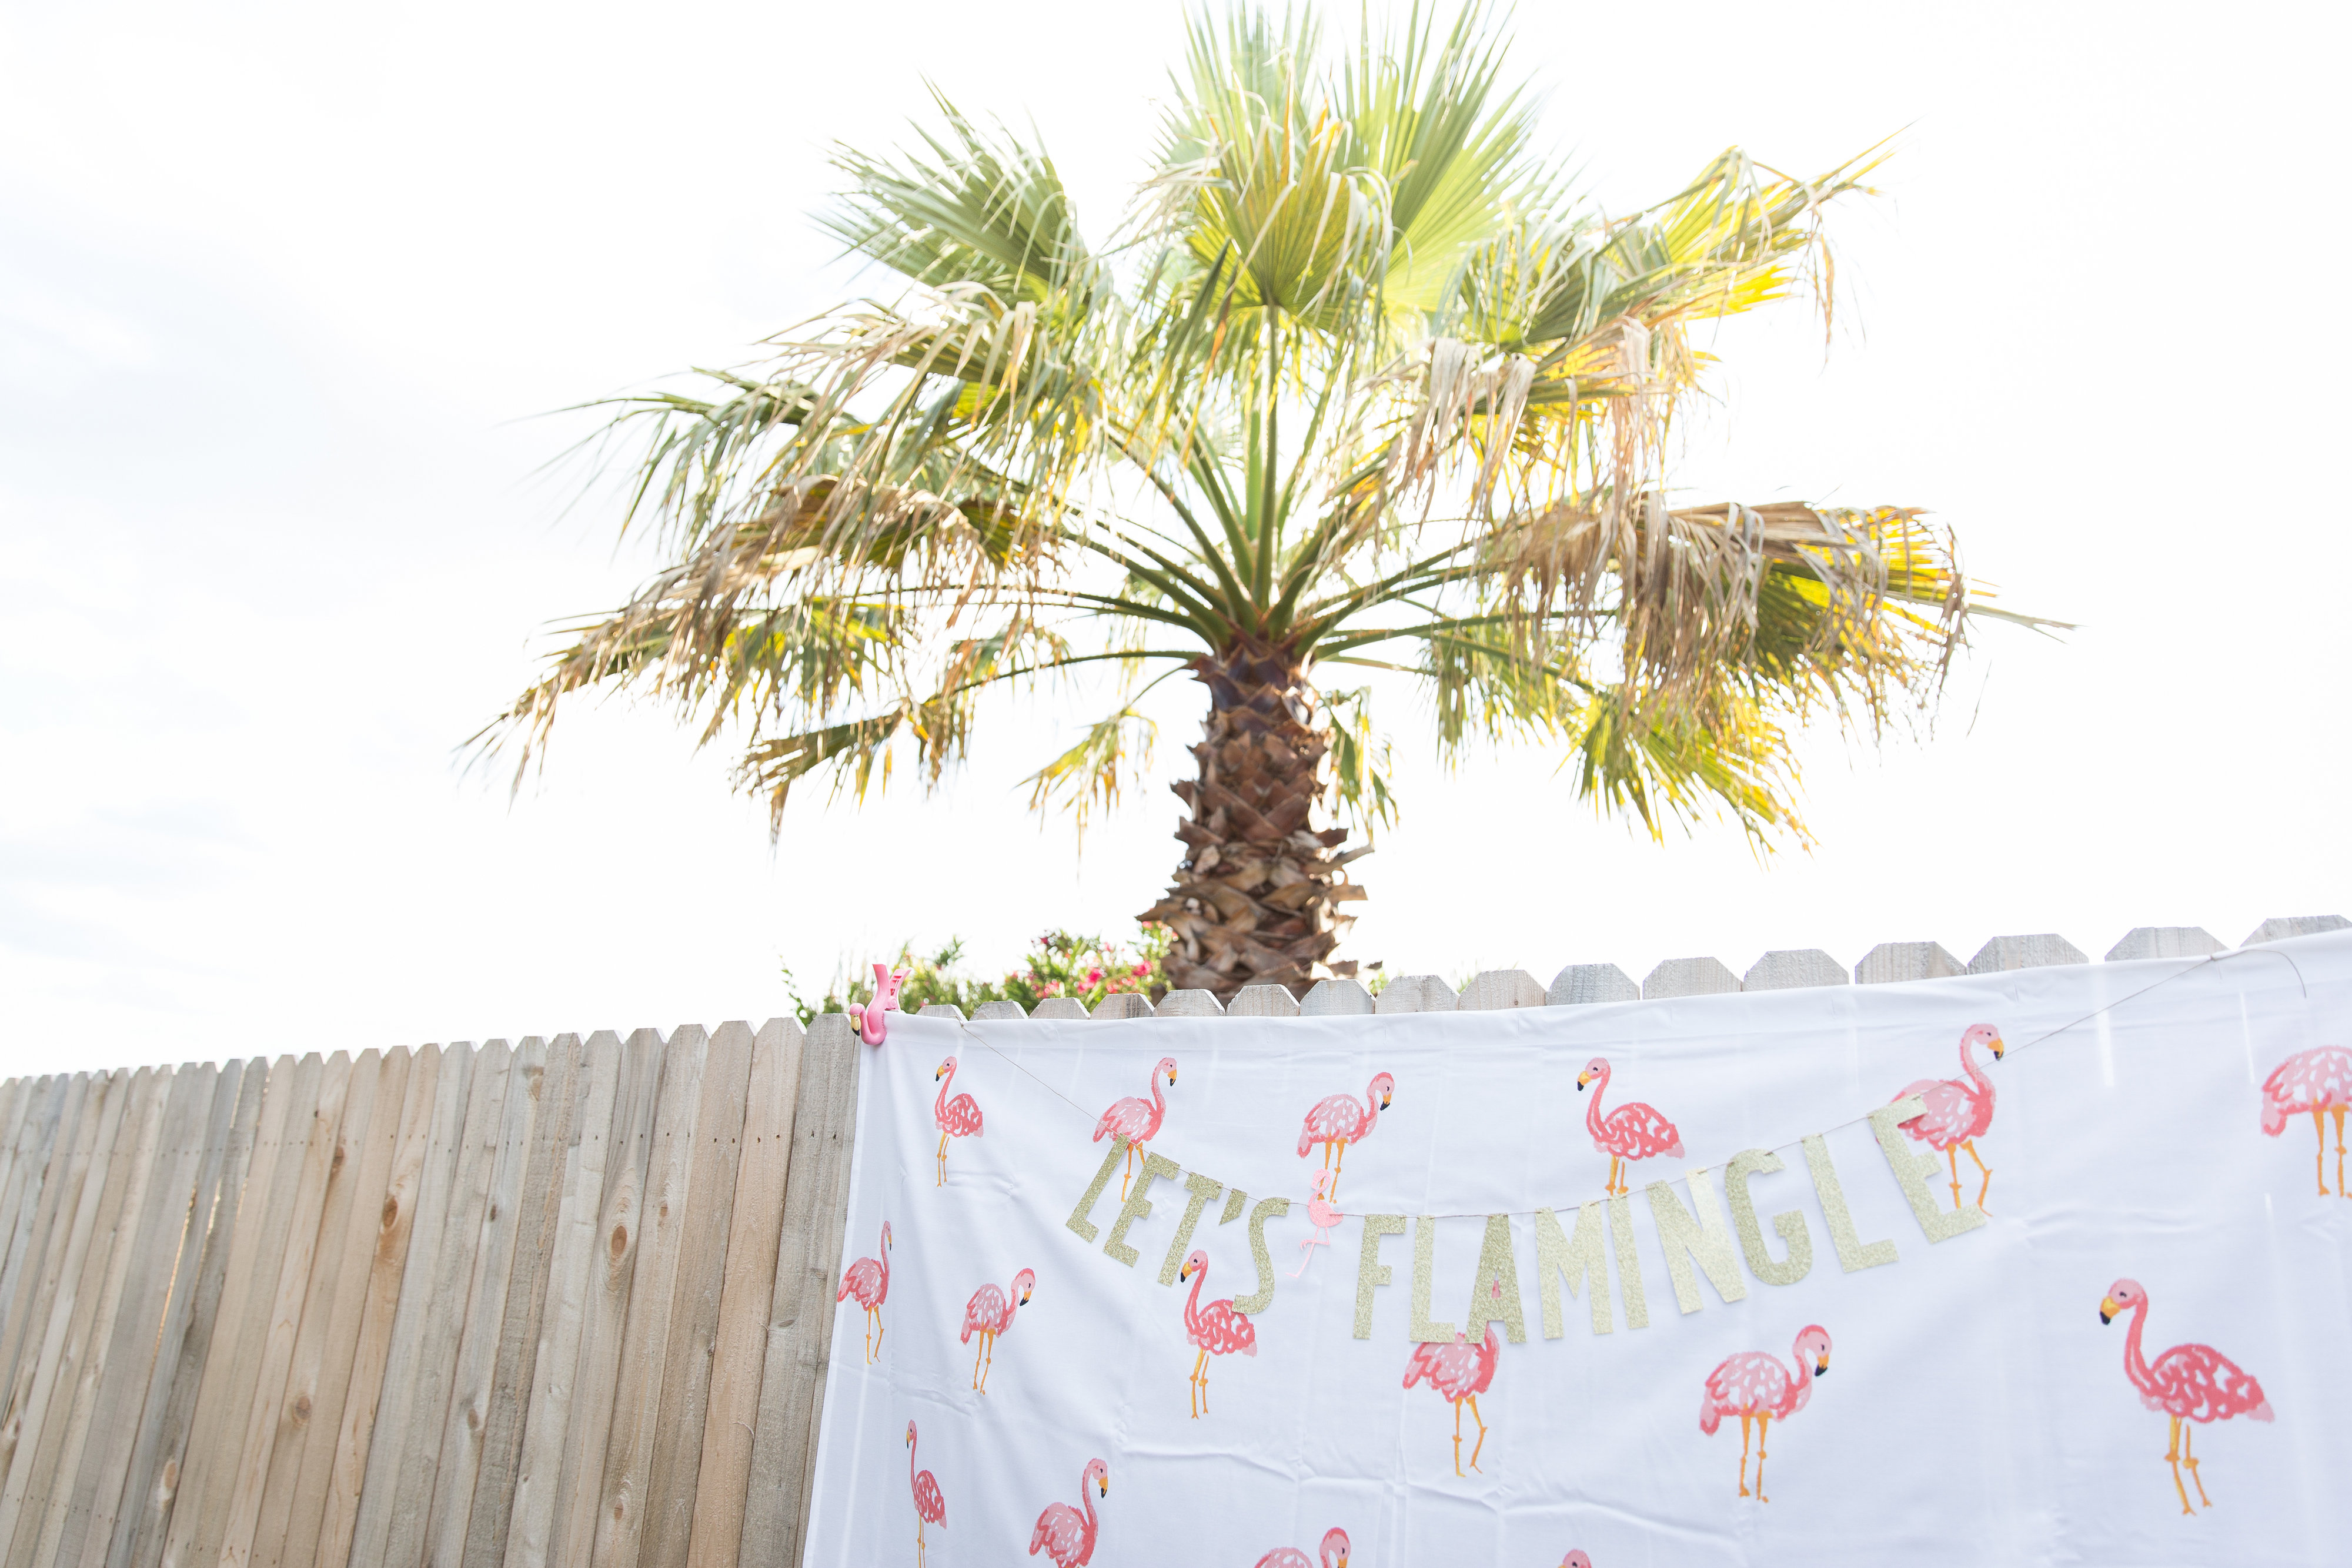 View More: http://margodawnphotography.pass.us/flamingo-fling